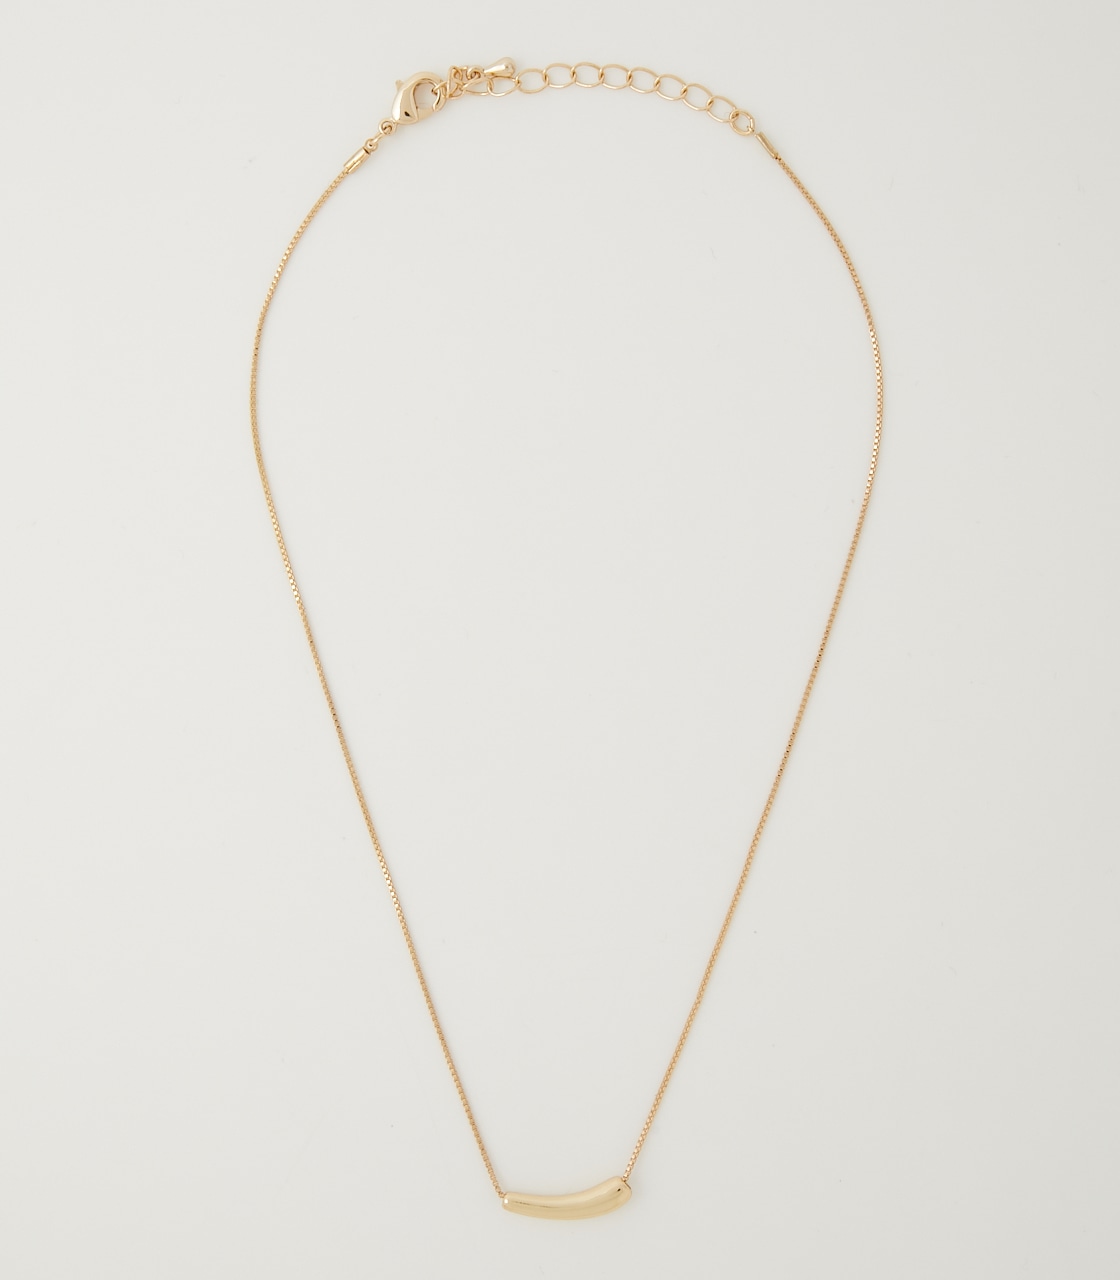 SIMPLE POLE NECKLACE/シンプルポールネックレス 詳細画像 L/GLD 1